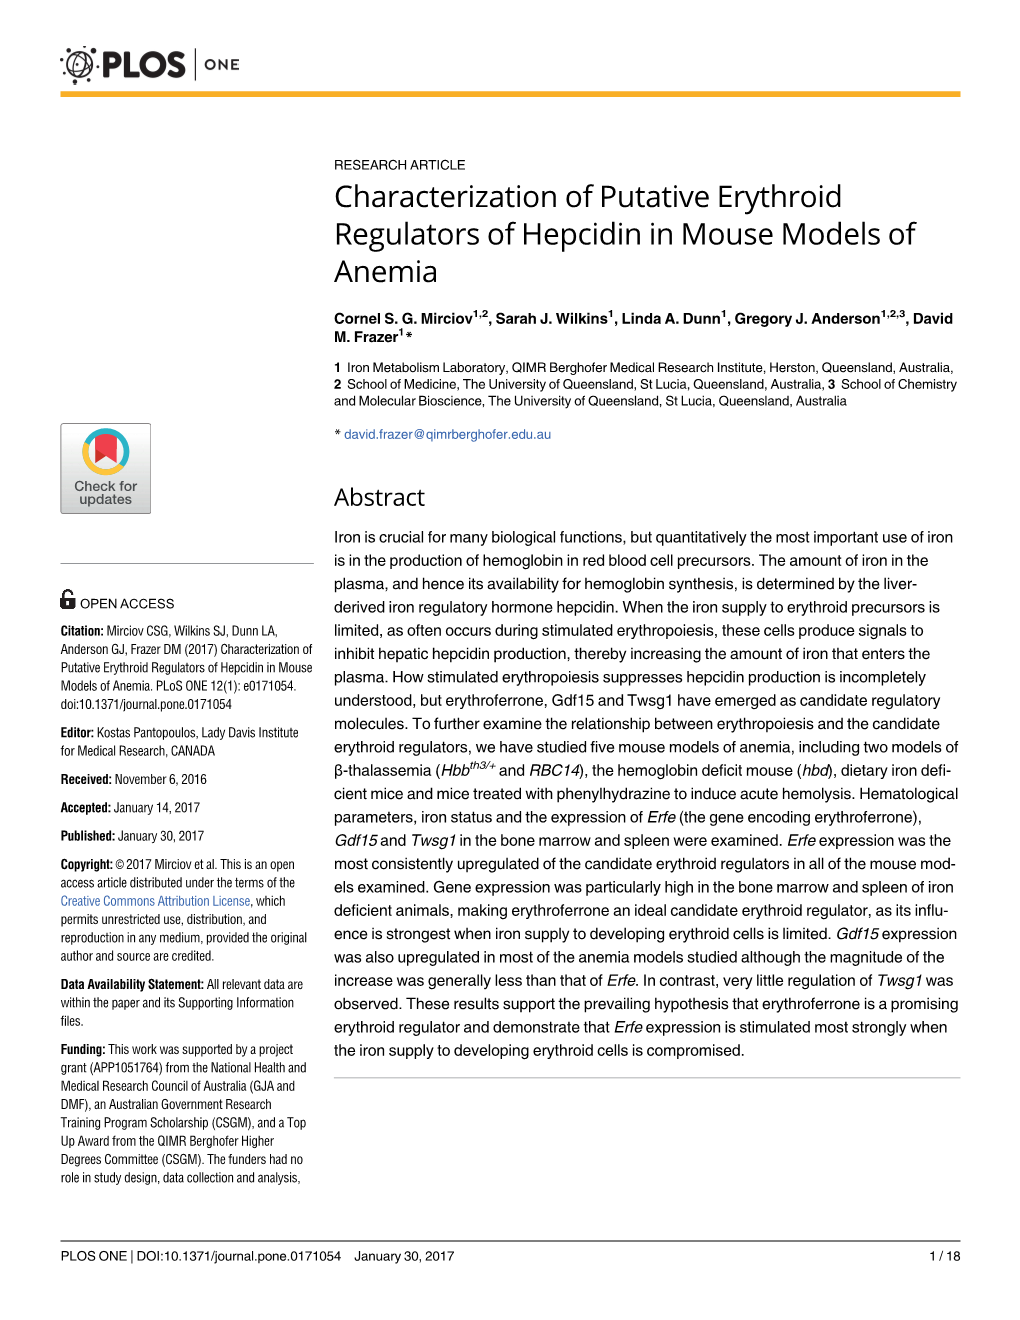 Characterization of Putative Erythroid Regulators of Hepcidin in Mouse Models of Anemia